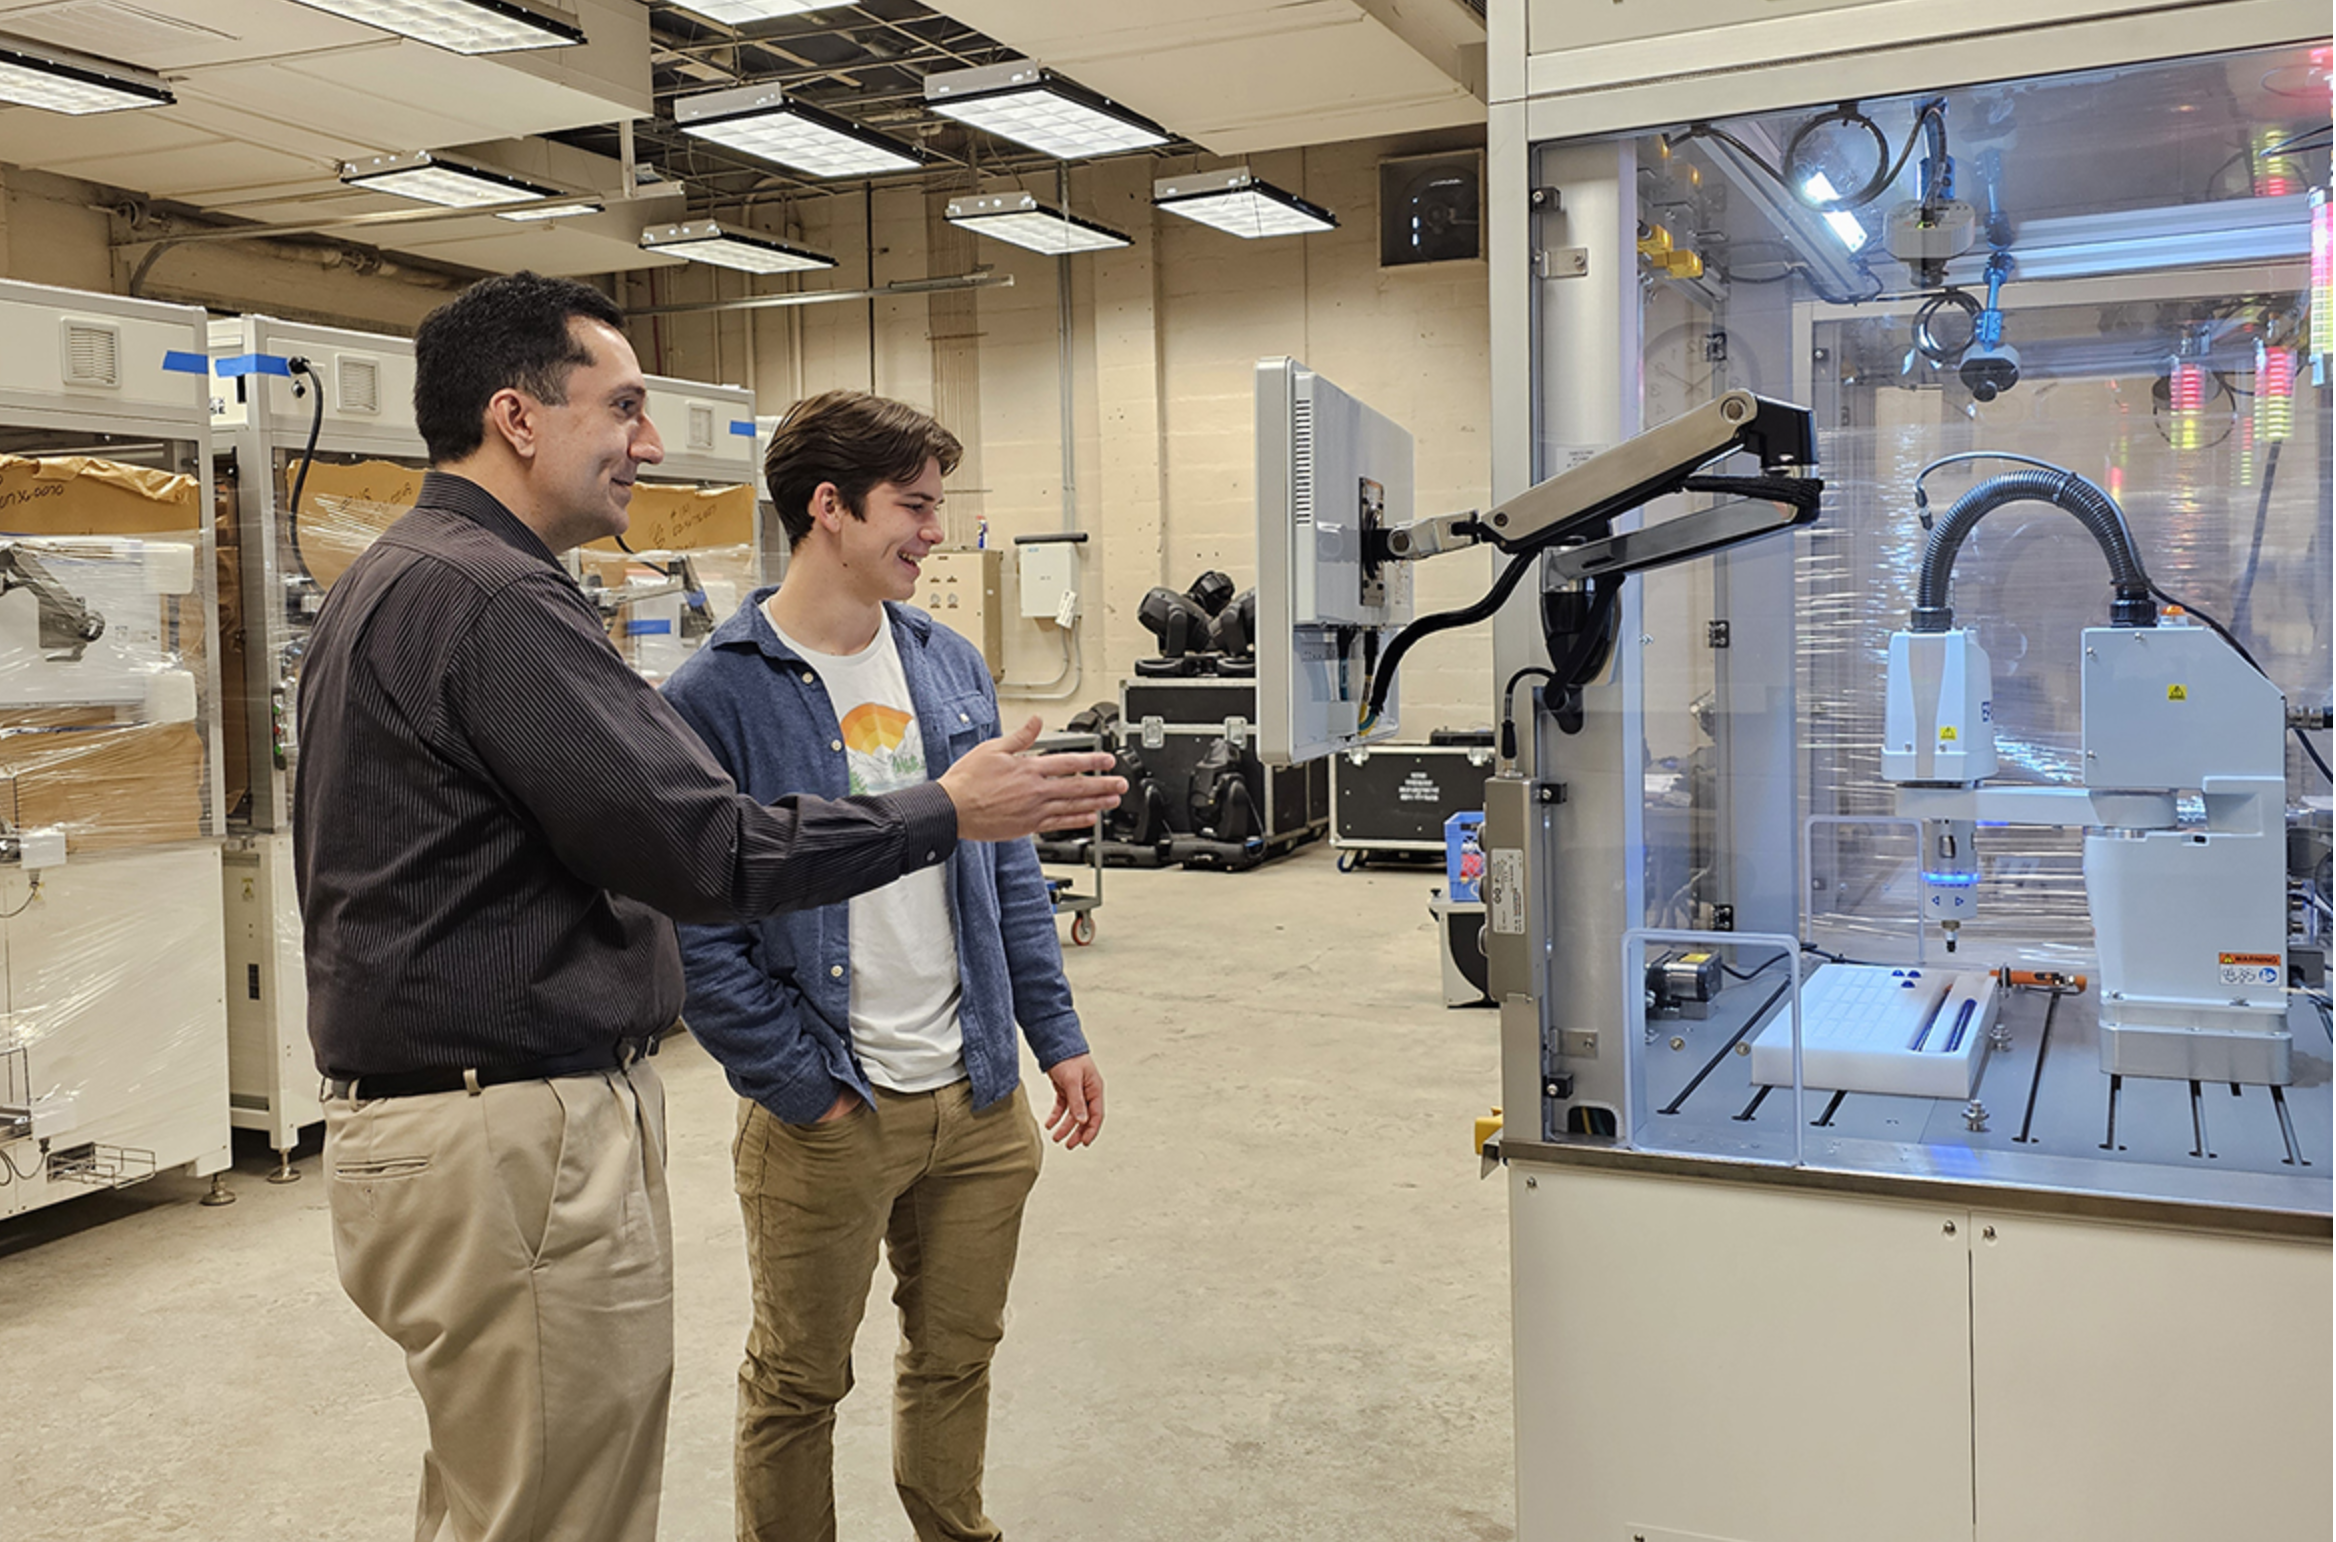 Middle Tennessee State University junior mechatronics engineering major Samuel Apigian, right, and Engineering Technology lecturer Antonio Saavedra are pictured next to robotics equipment inside a Voorhees Engineering Technology laboratory earlier this semester on the MTSU campus. Apigian is heading to Germany this summer after being awarded the highly competitive DAAD RISE scholarship where he will be interning at Technische Universität Dresden. (MTSU photo by Robin E. Lee)